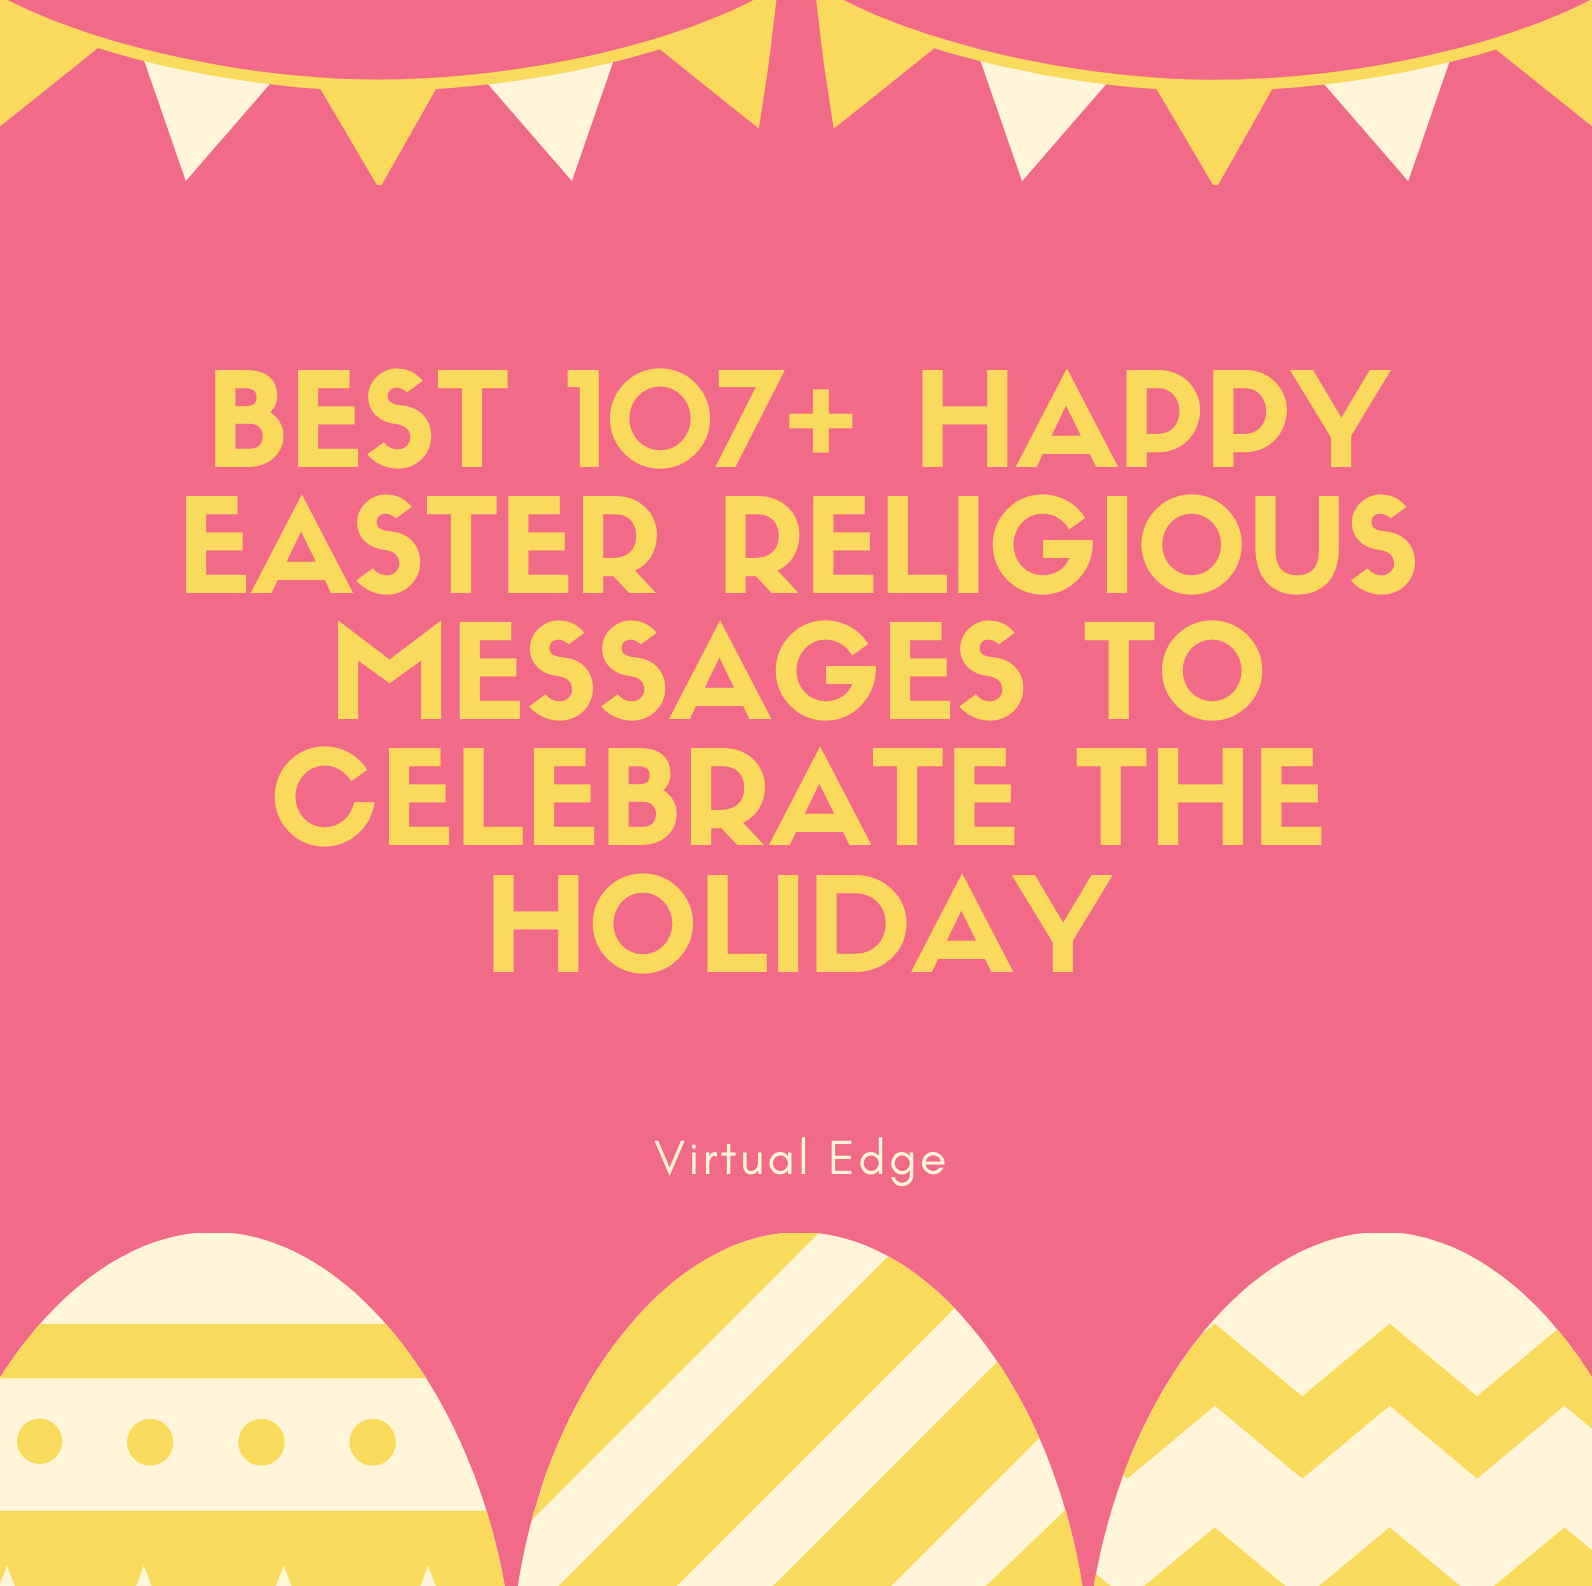 Best 107+ Happy Easter Religious Messages to Celebrate the Holiday